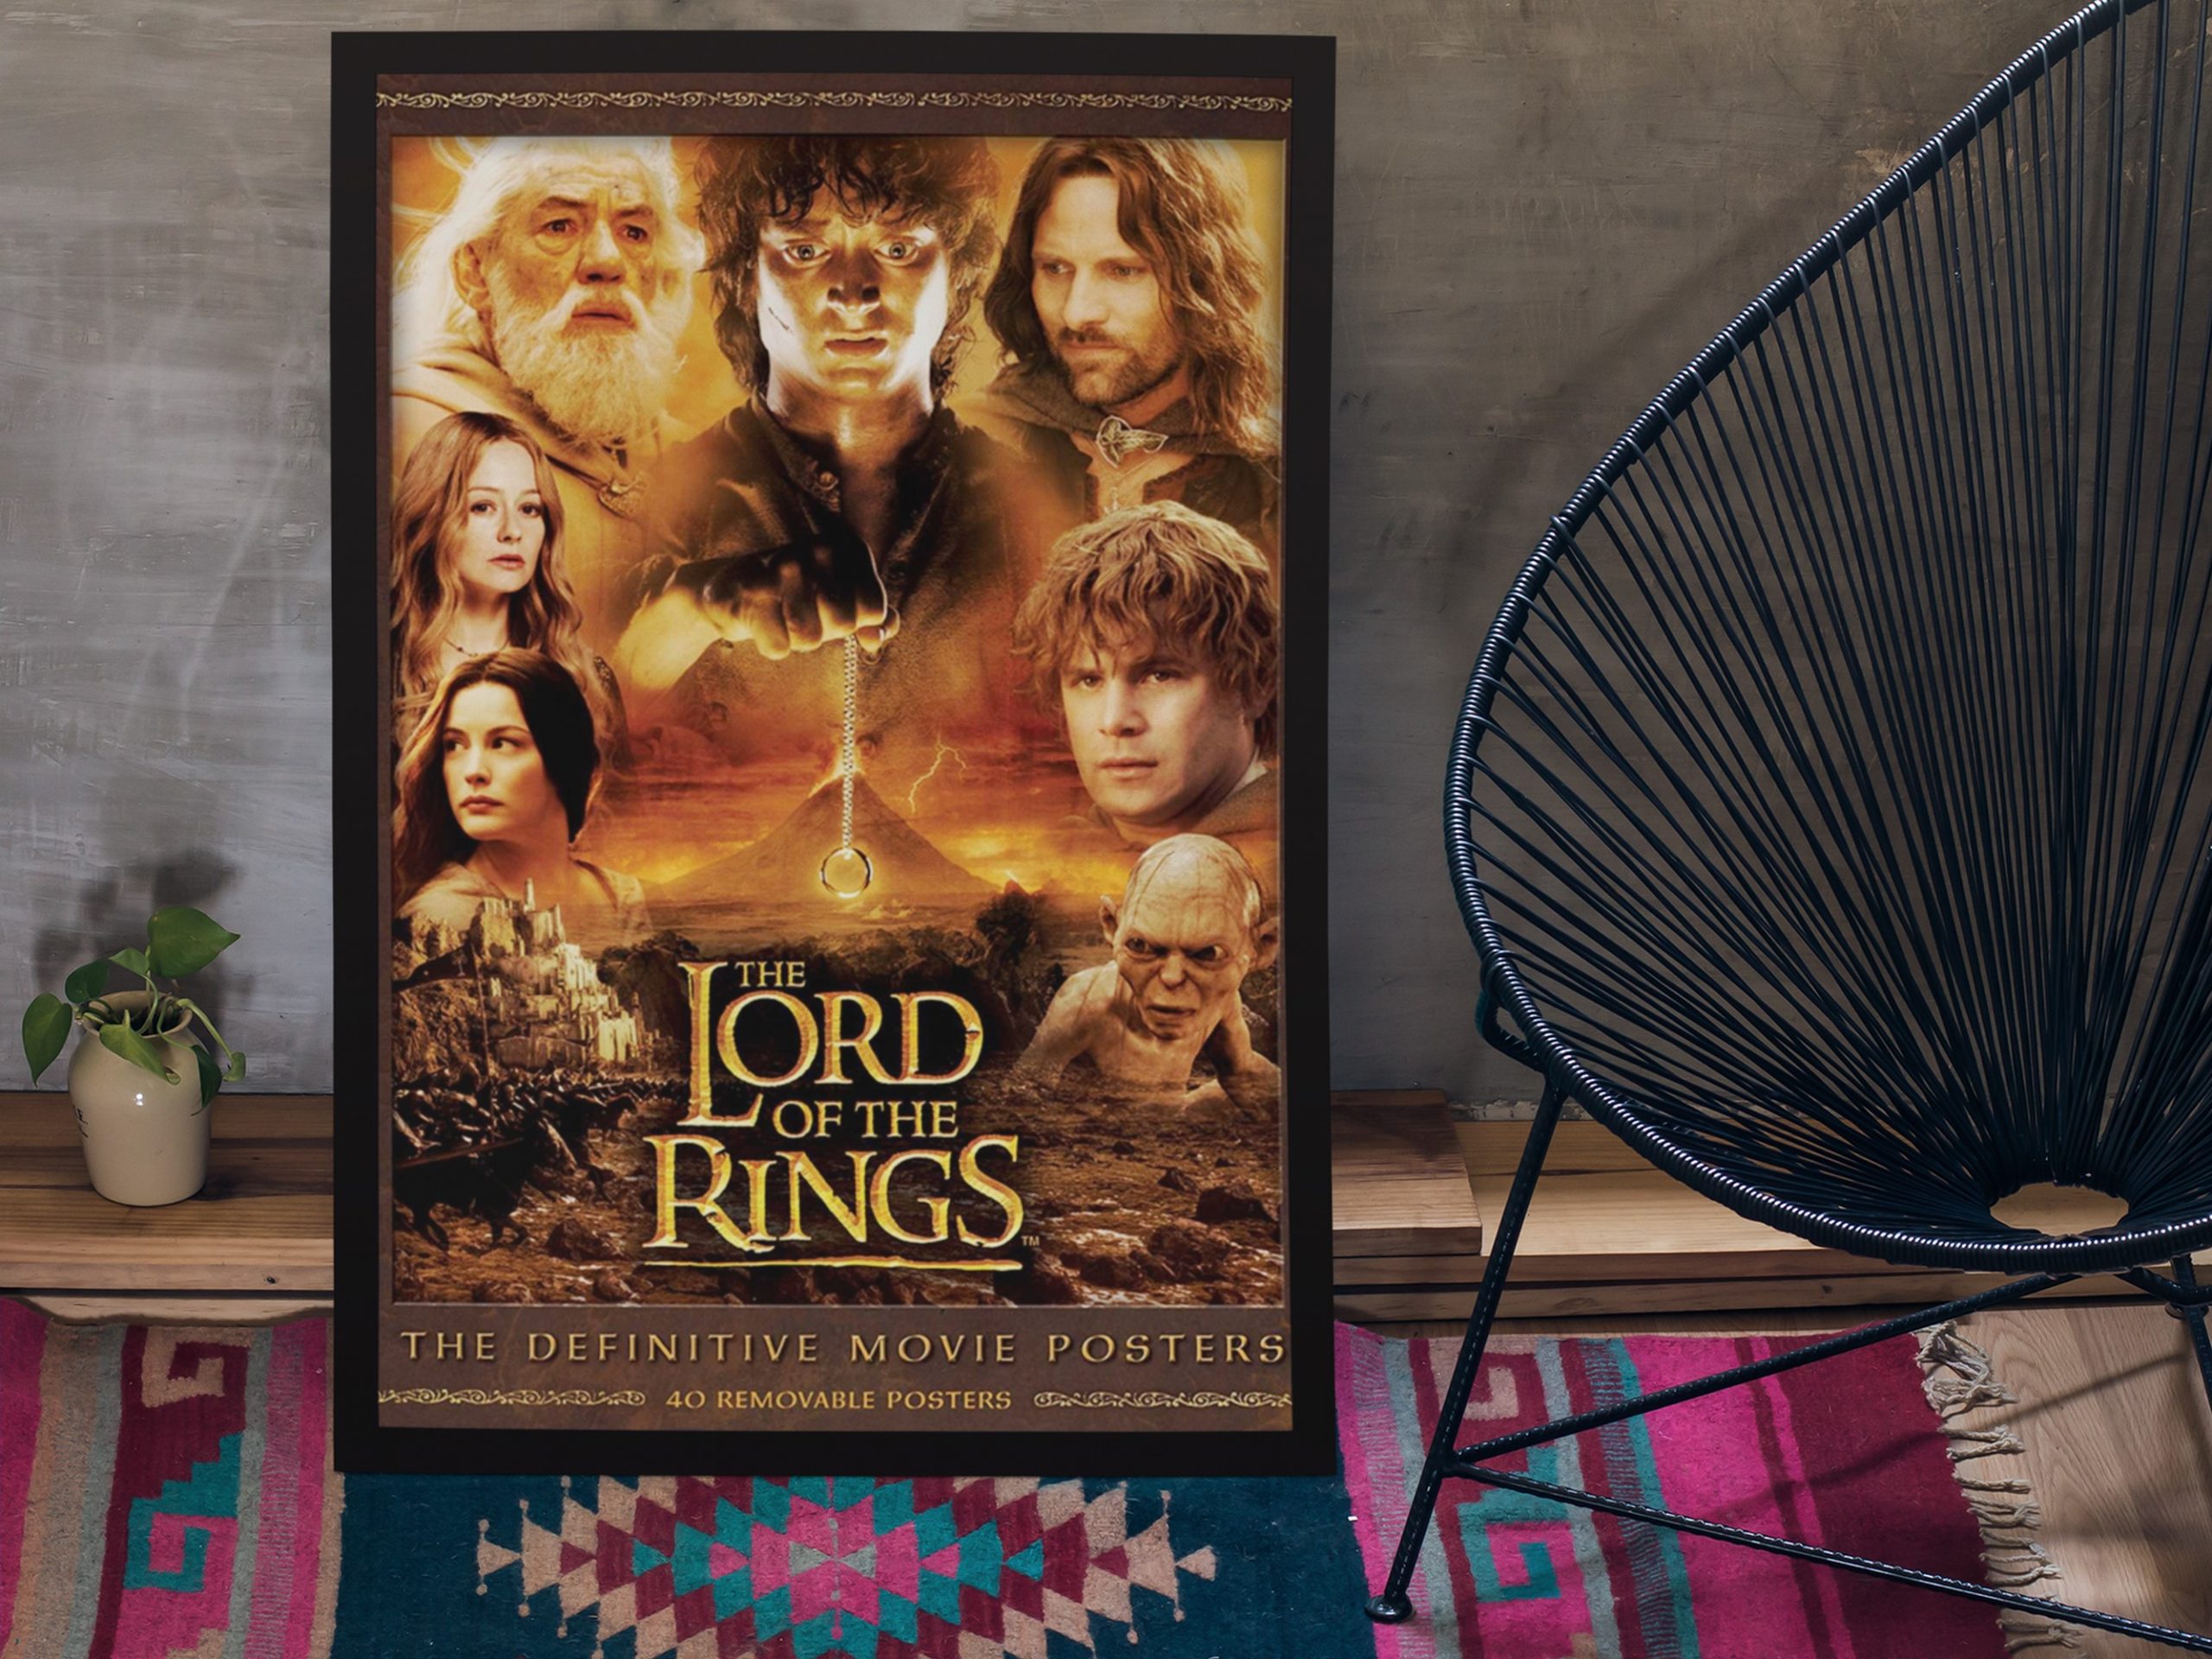 The Lord of the Rings: The Definitive Movie Posters (Insights